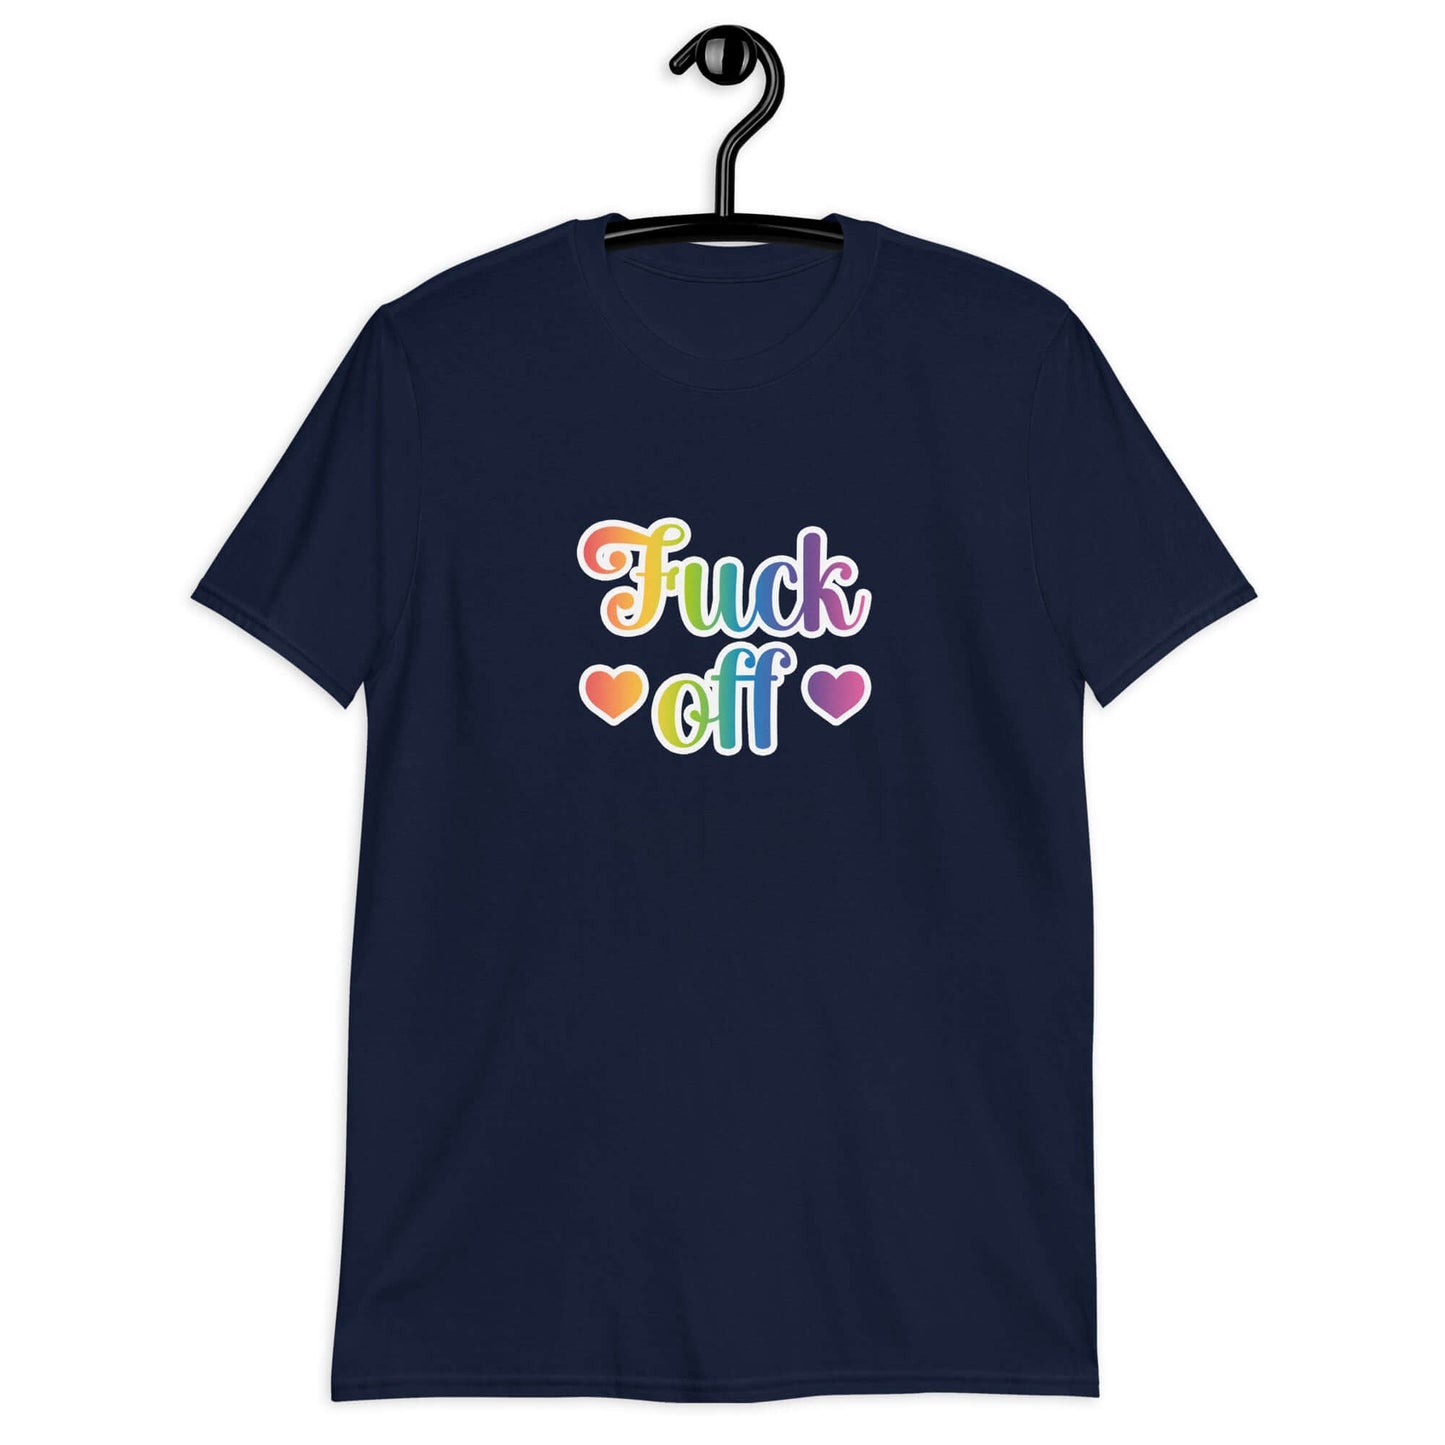 Navy blue t-shirt with the words Fuck off printed in 80's style rainbow font. The graphics are printed on the front of the shirt.